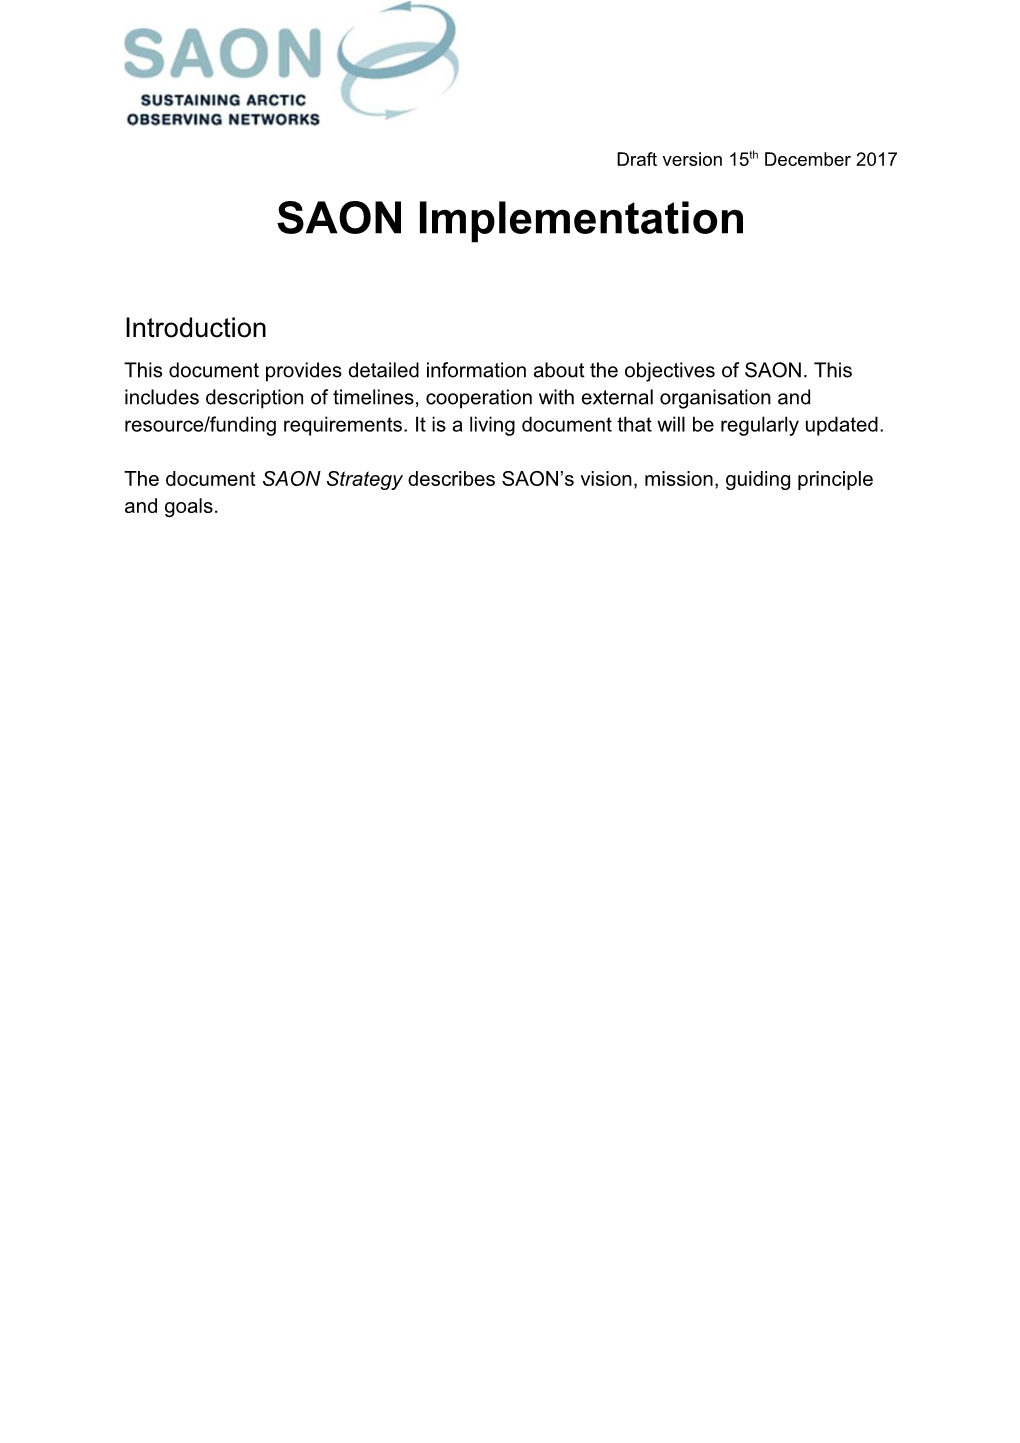 The Documentsaon Strategydescribes SAON S Vision, Mission, Guiding Principle and Goals